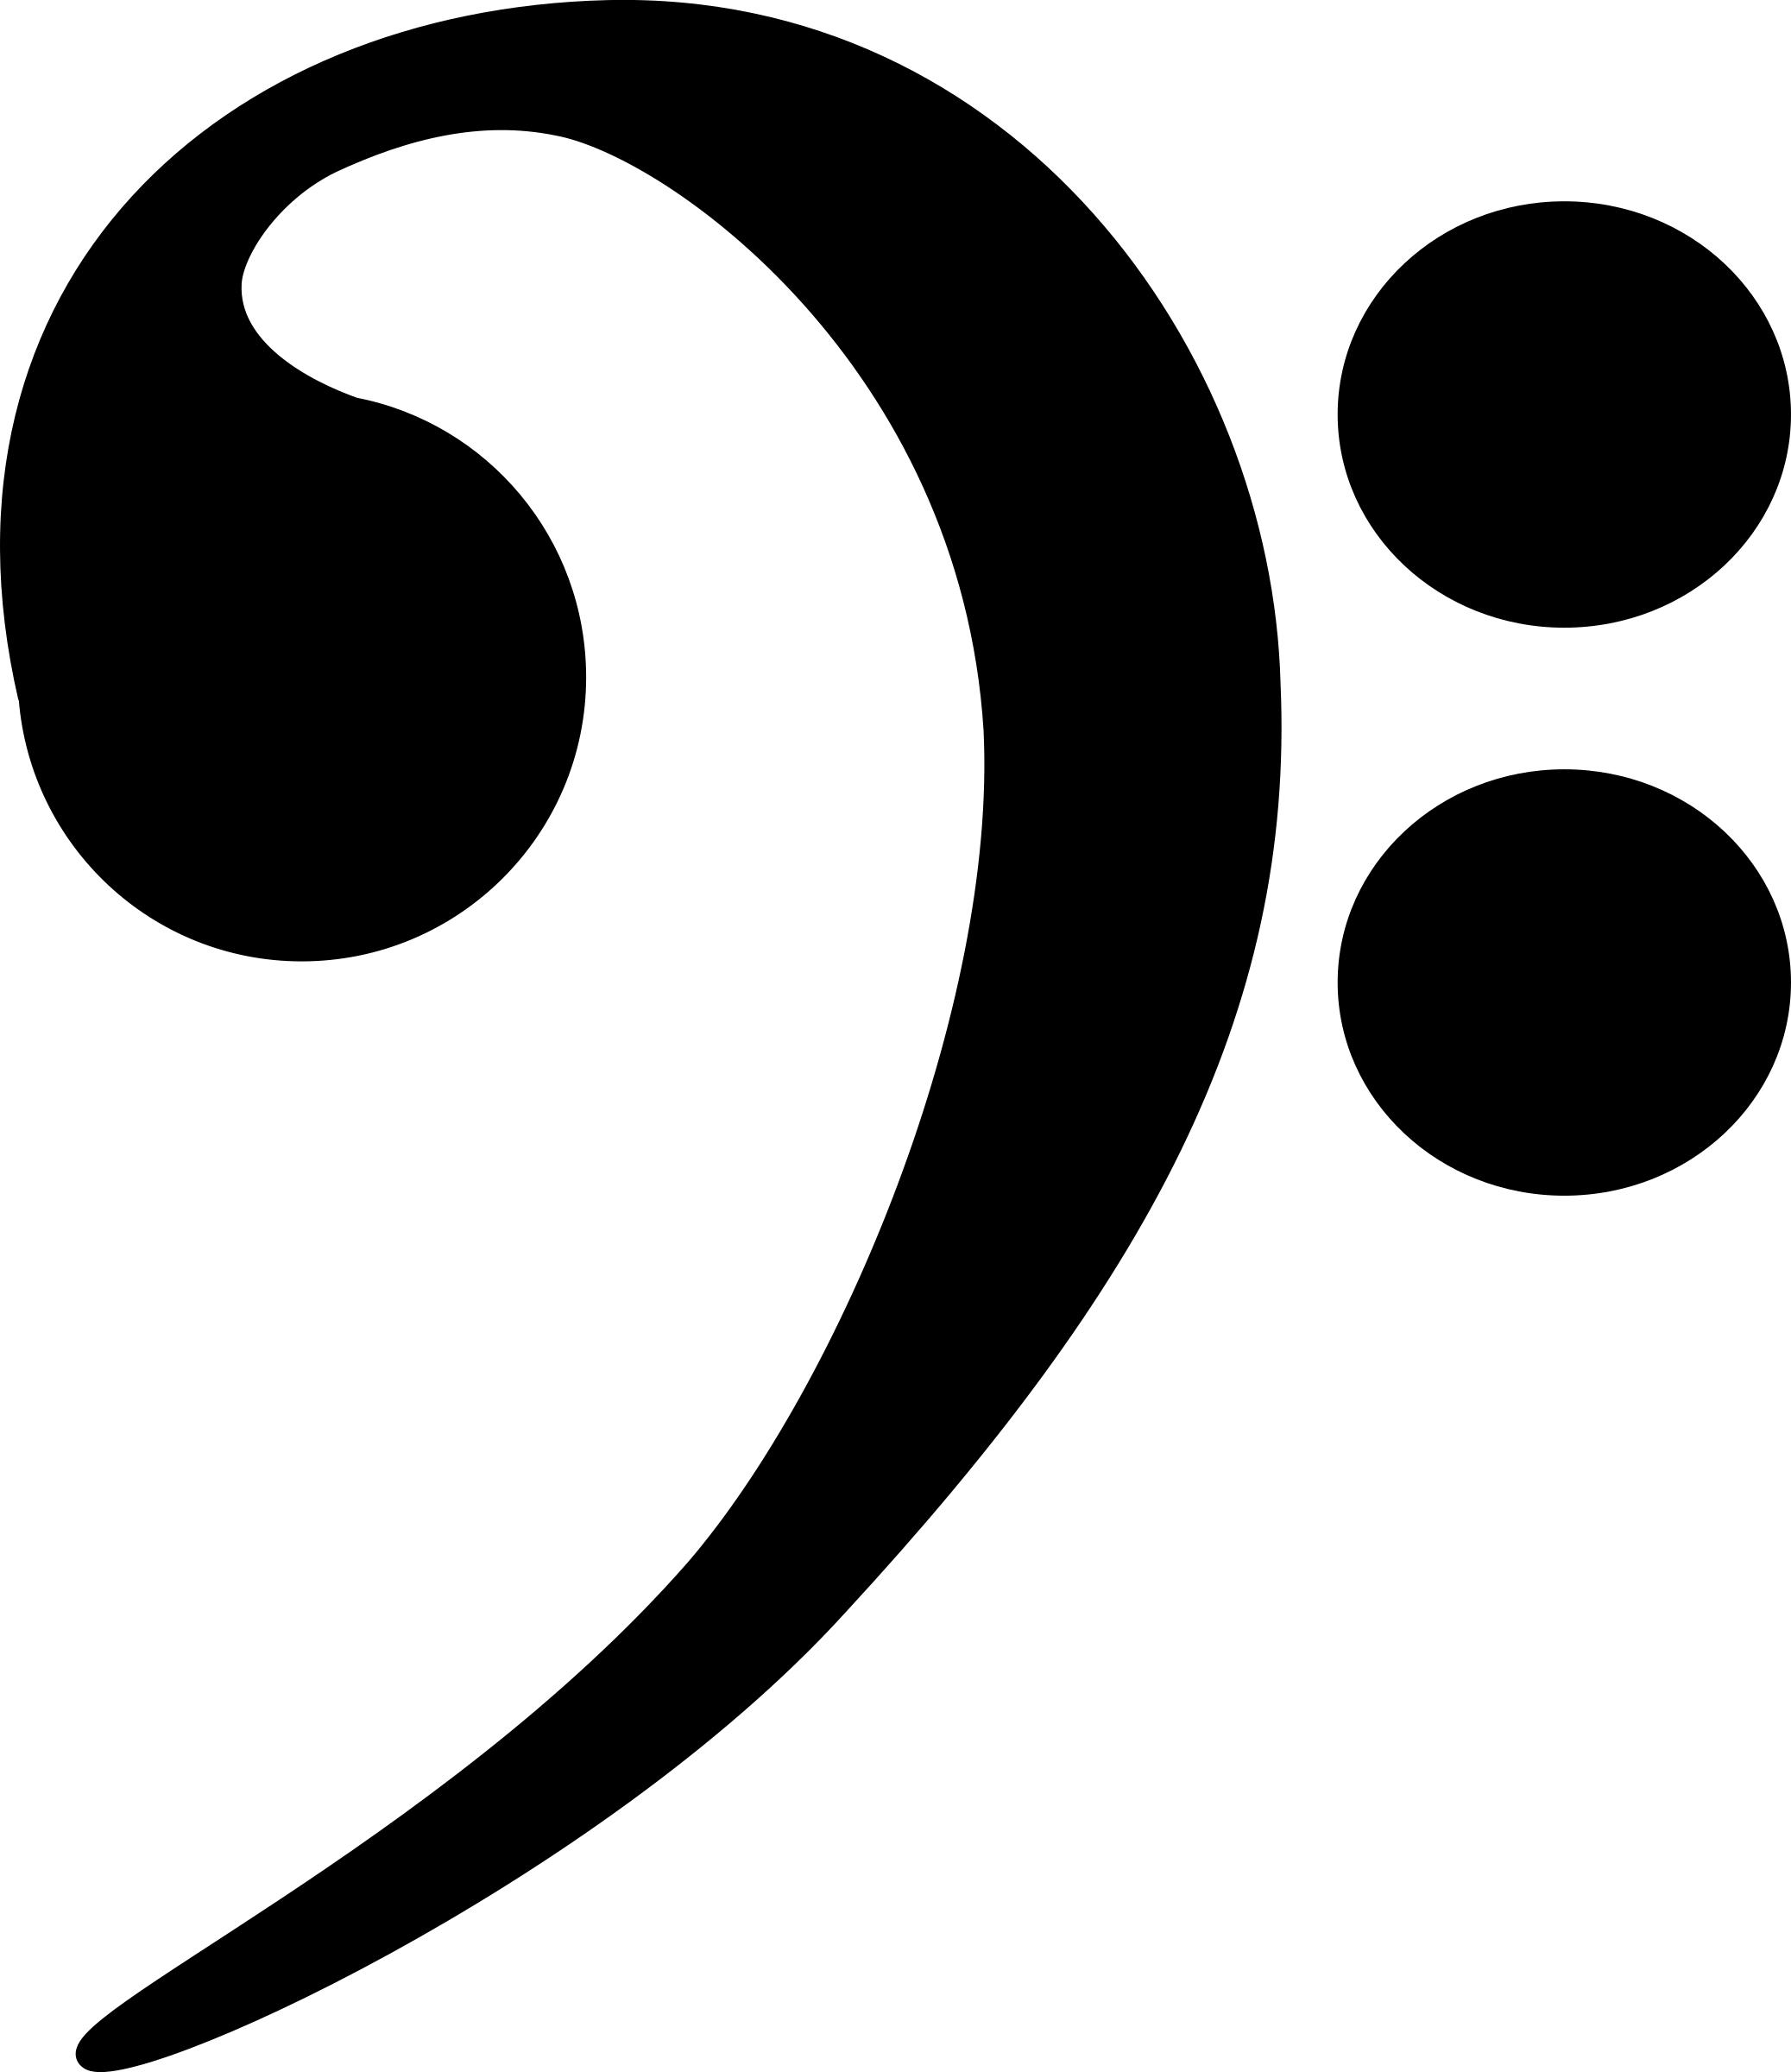 Black Bass Clef icons